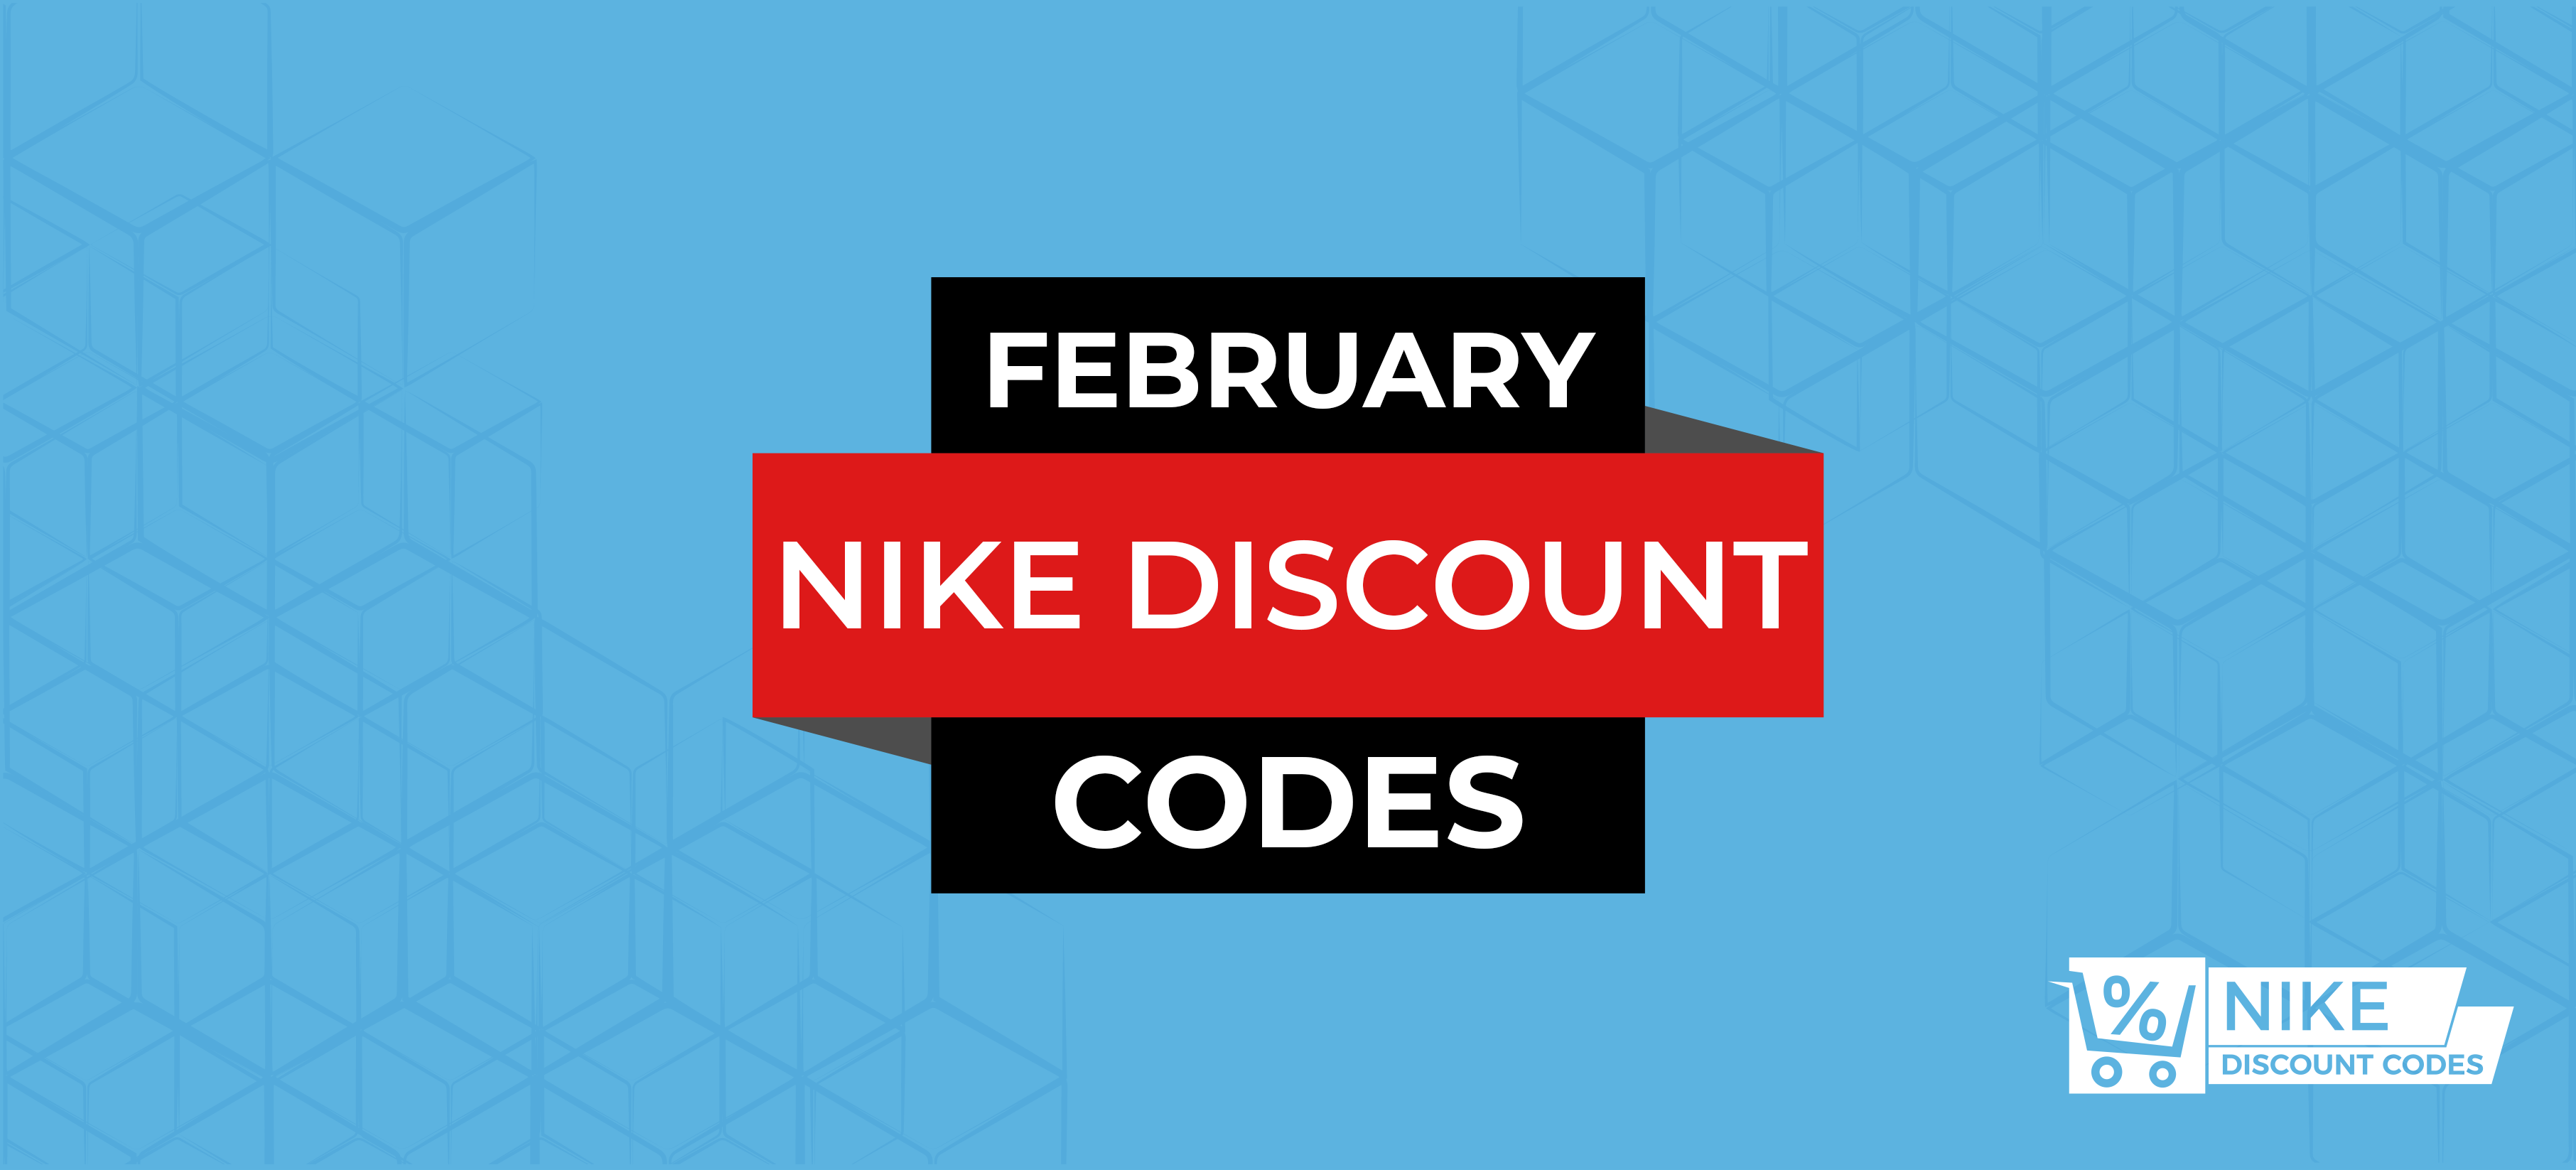 nike codes march 2020